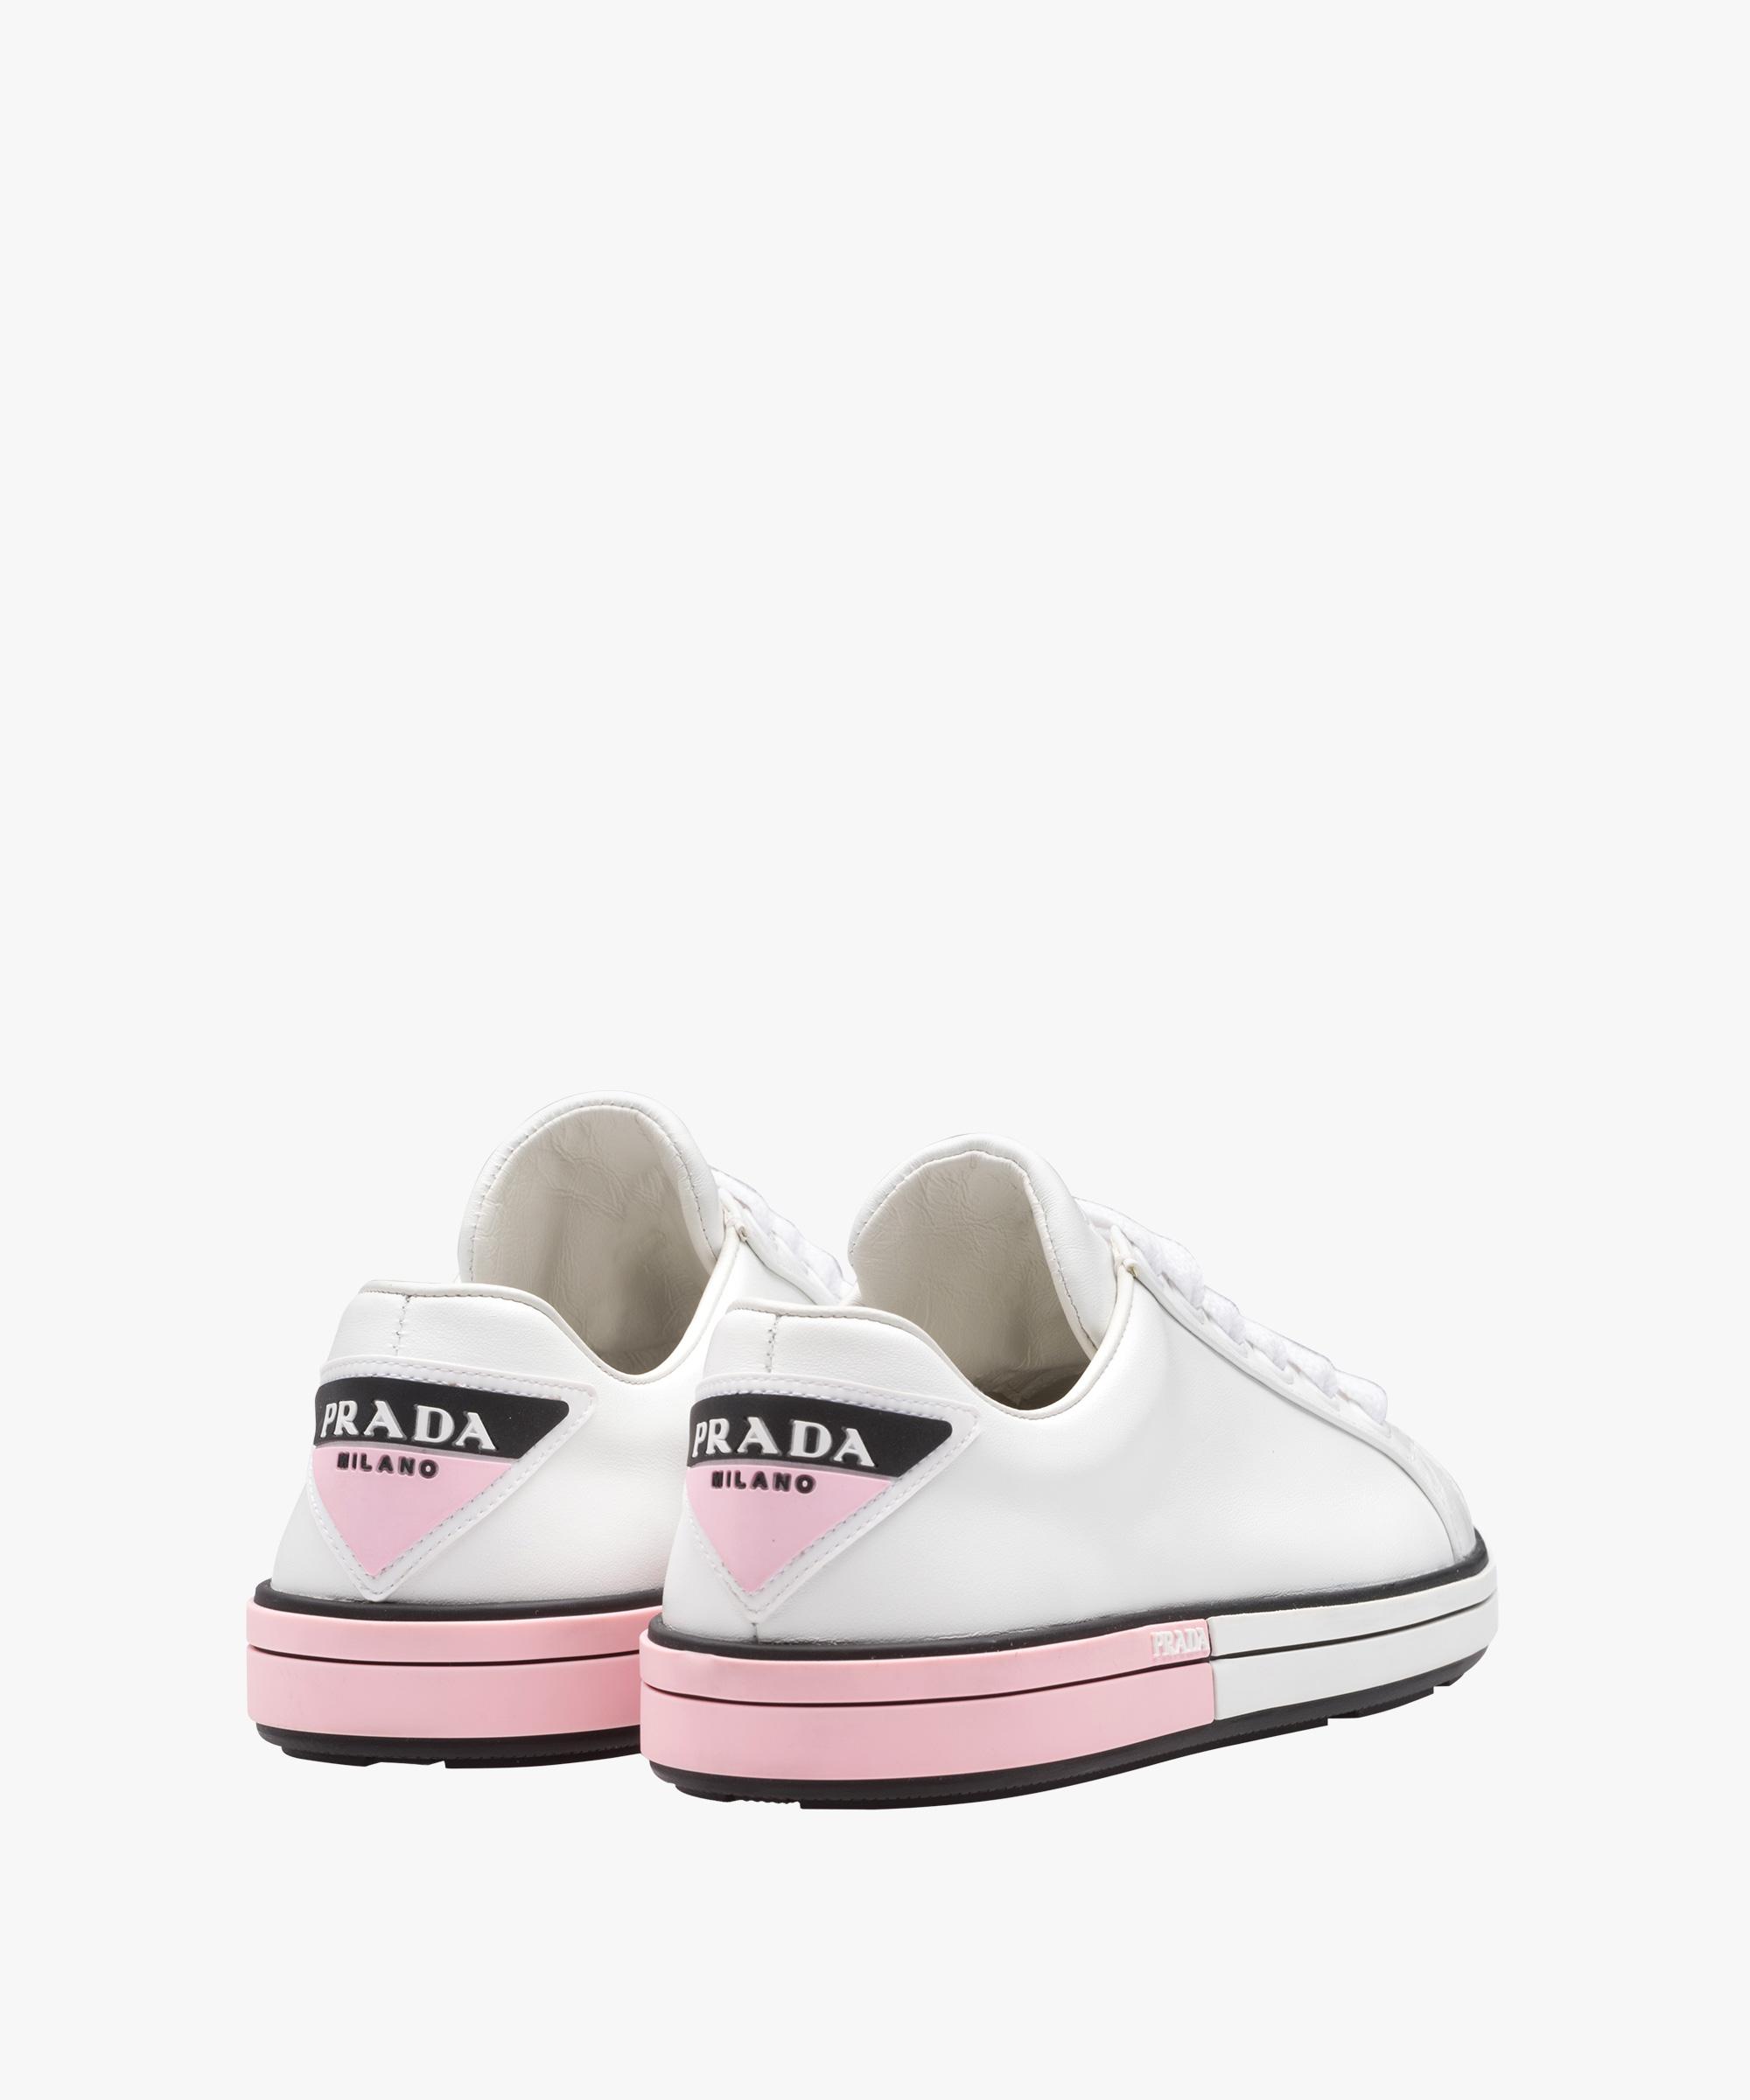 Prada Calf Leather Sneakers in White+Pink (White) - Lyst